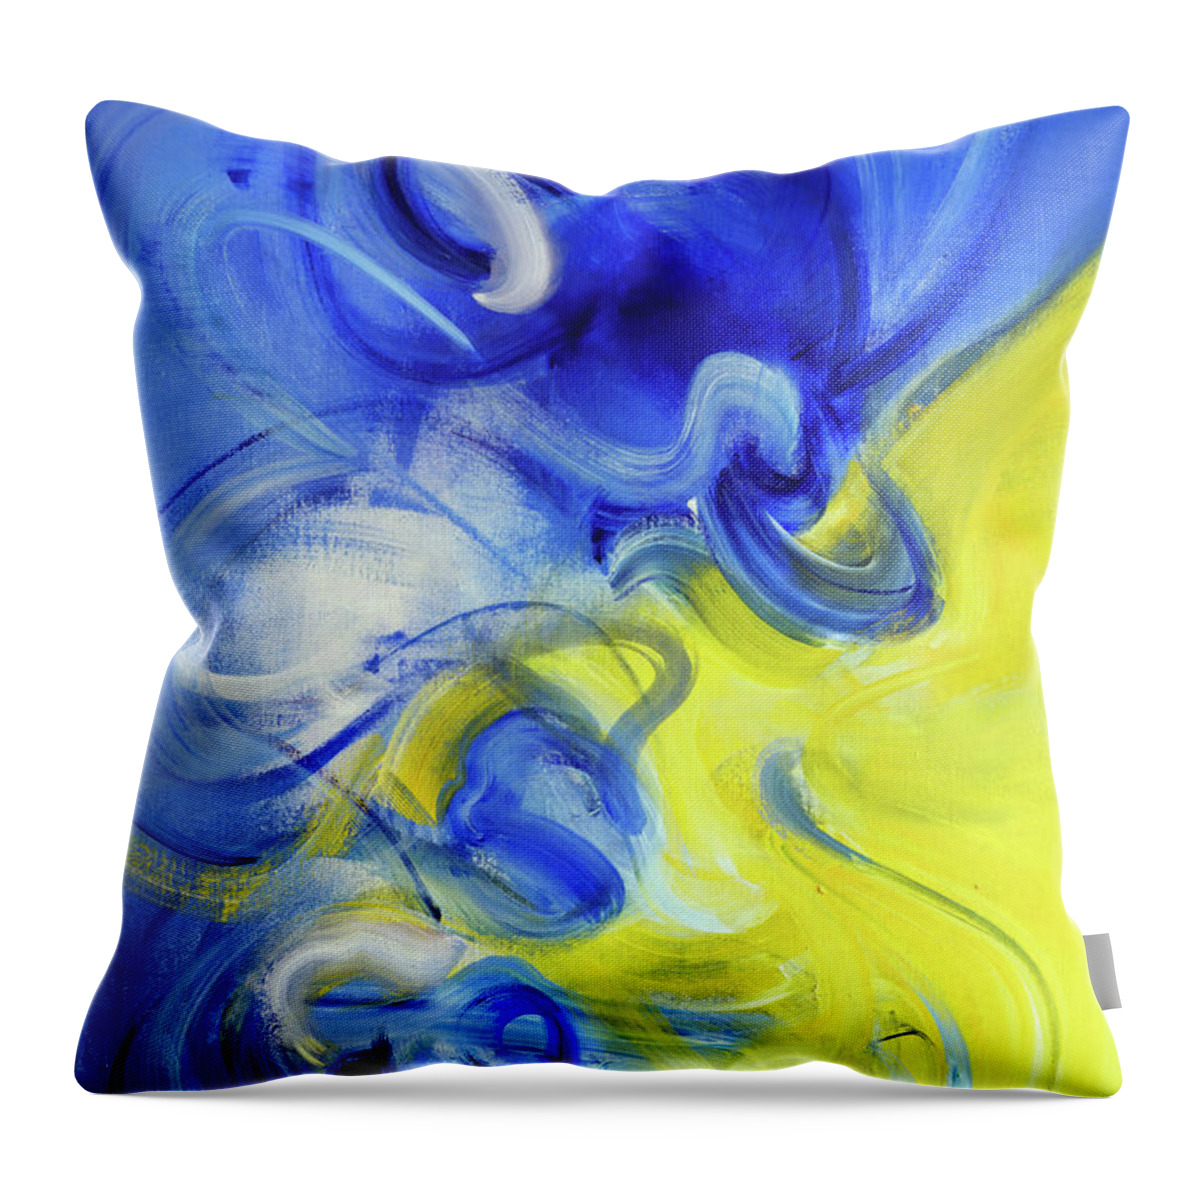 Blue Throw Pillow featuring the painting Actions Speak by Ritchard Rodriguez